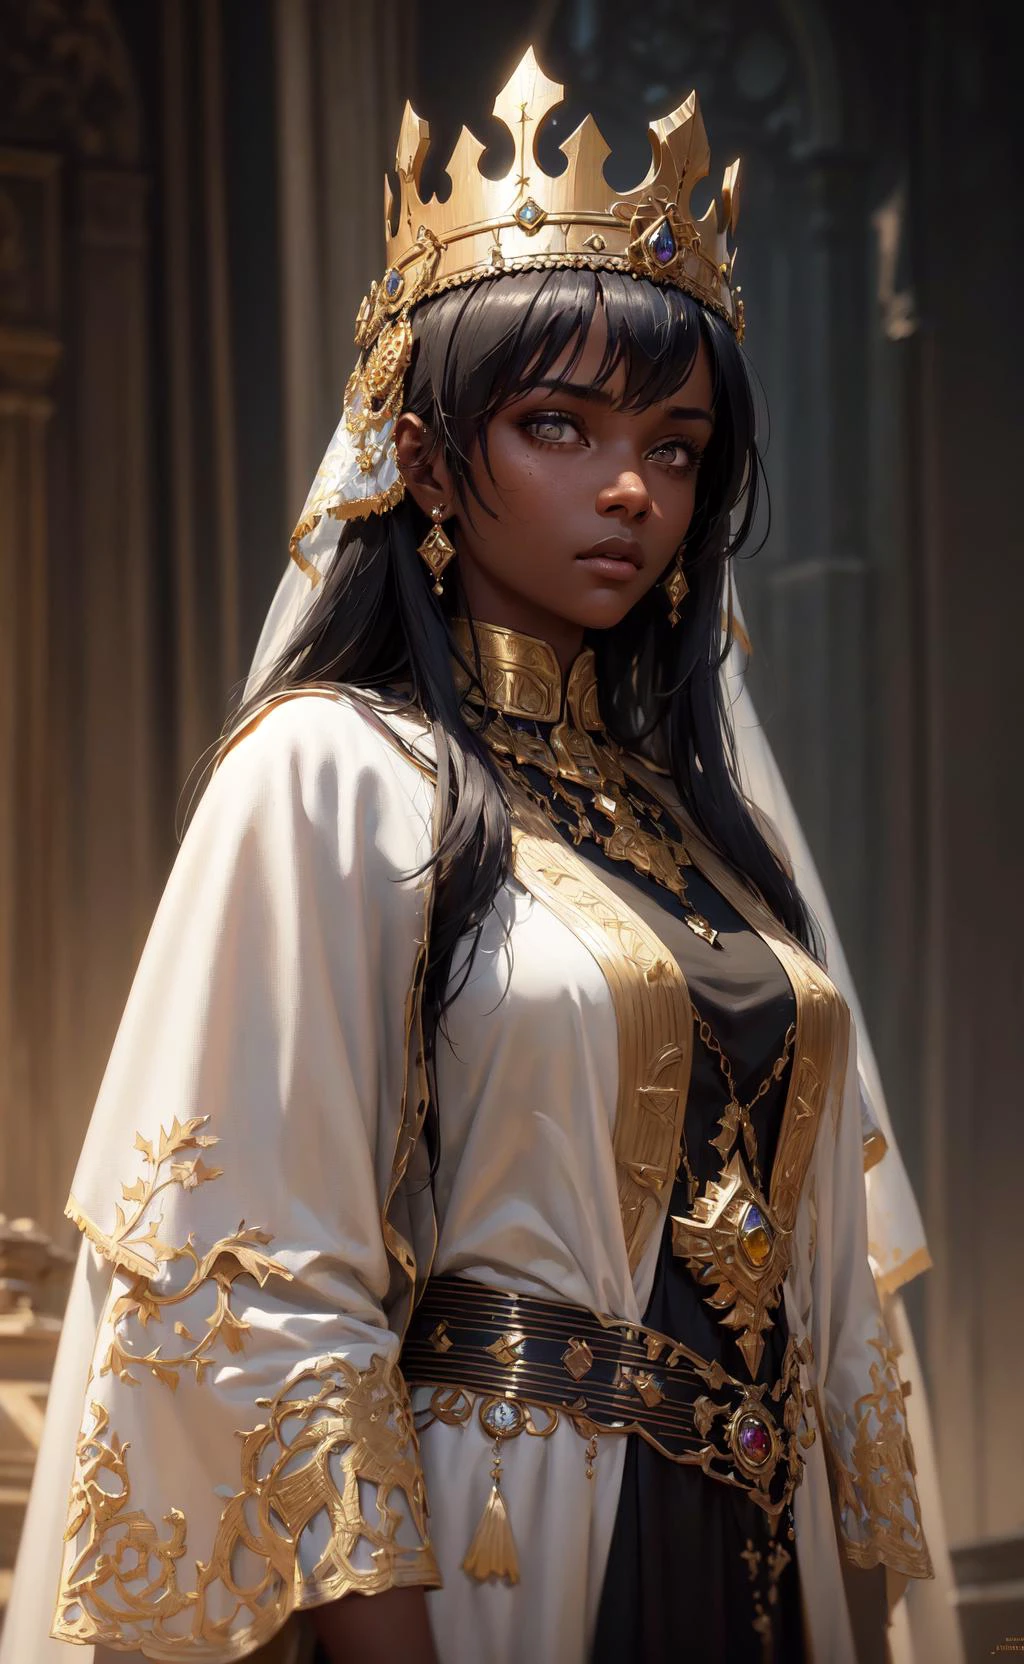 modelshoot style, (extremely detailed CG unity 8k wallpaper), full shot body photo of the most beautiful artwork in the world, medieval queen, green vale, dark skin, black woman, golden crown, diamonds, medieval architecture, professional majestic oil painting by Ed Blinkey, Atey Ghailan, Studio Ghibli, by Jeremy Mann, Greg Manchess, Antonio Moro, trending on ArtStation, trending on CGSociety, Intricate, High Detail, Sharp focus, dramatic, photorealistic painting art by midjourney and greg rutkowski